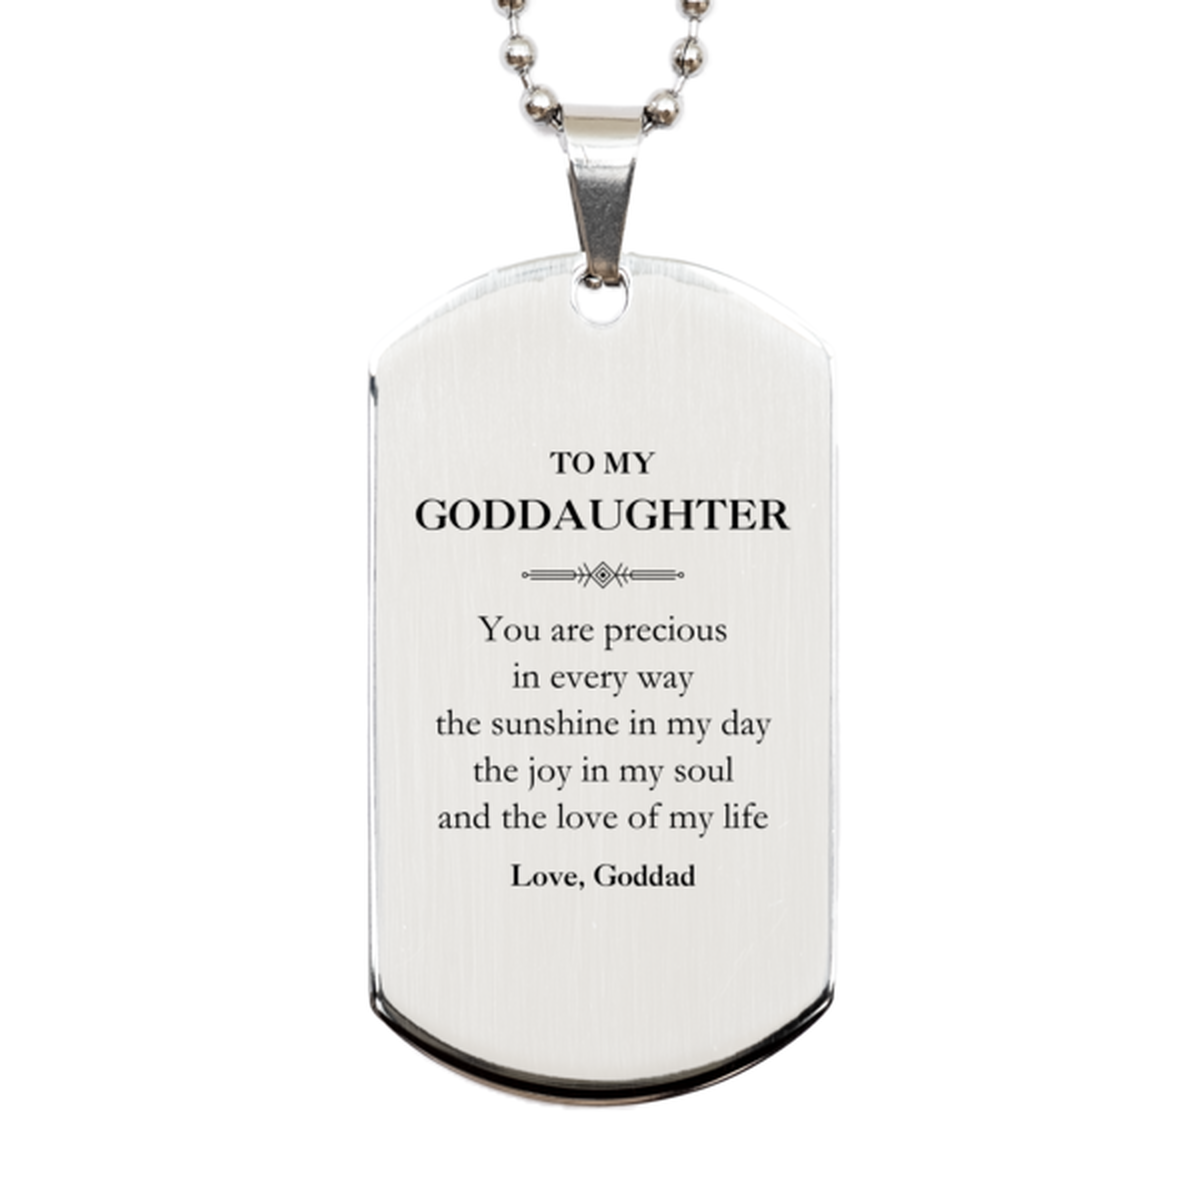 Graduation Gifts for Goddaughter Silver Dog Tag Present from Goddad, Christmas Goddaughter Birthday Gifts Goddaughter You are precious in every way the sunshine in my day. Love, Goddad